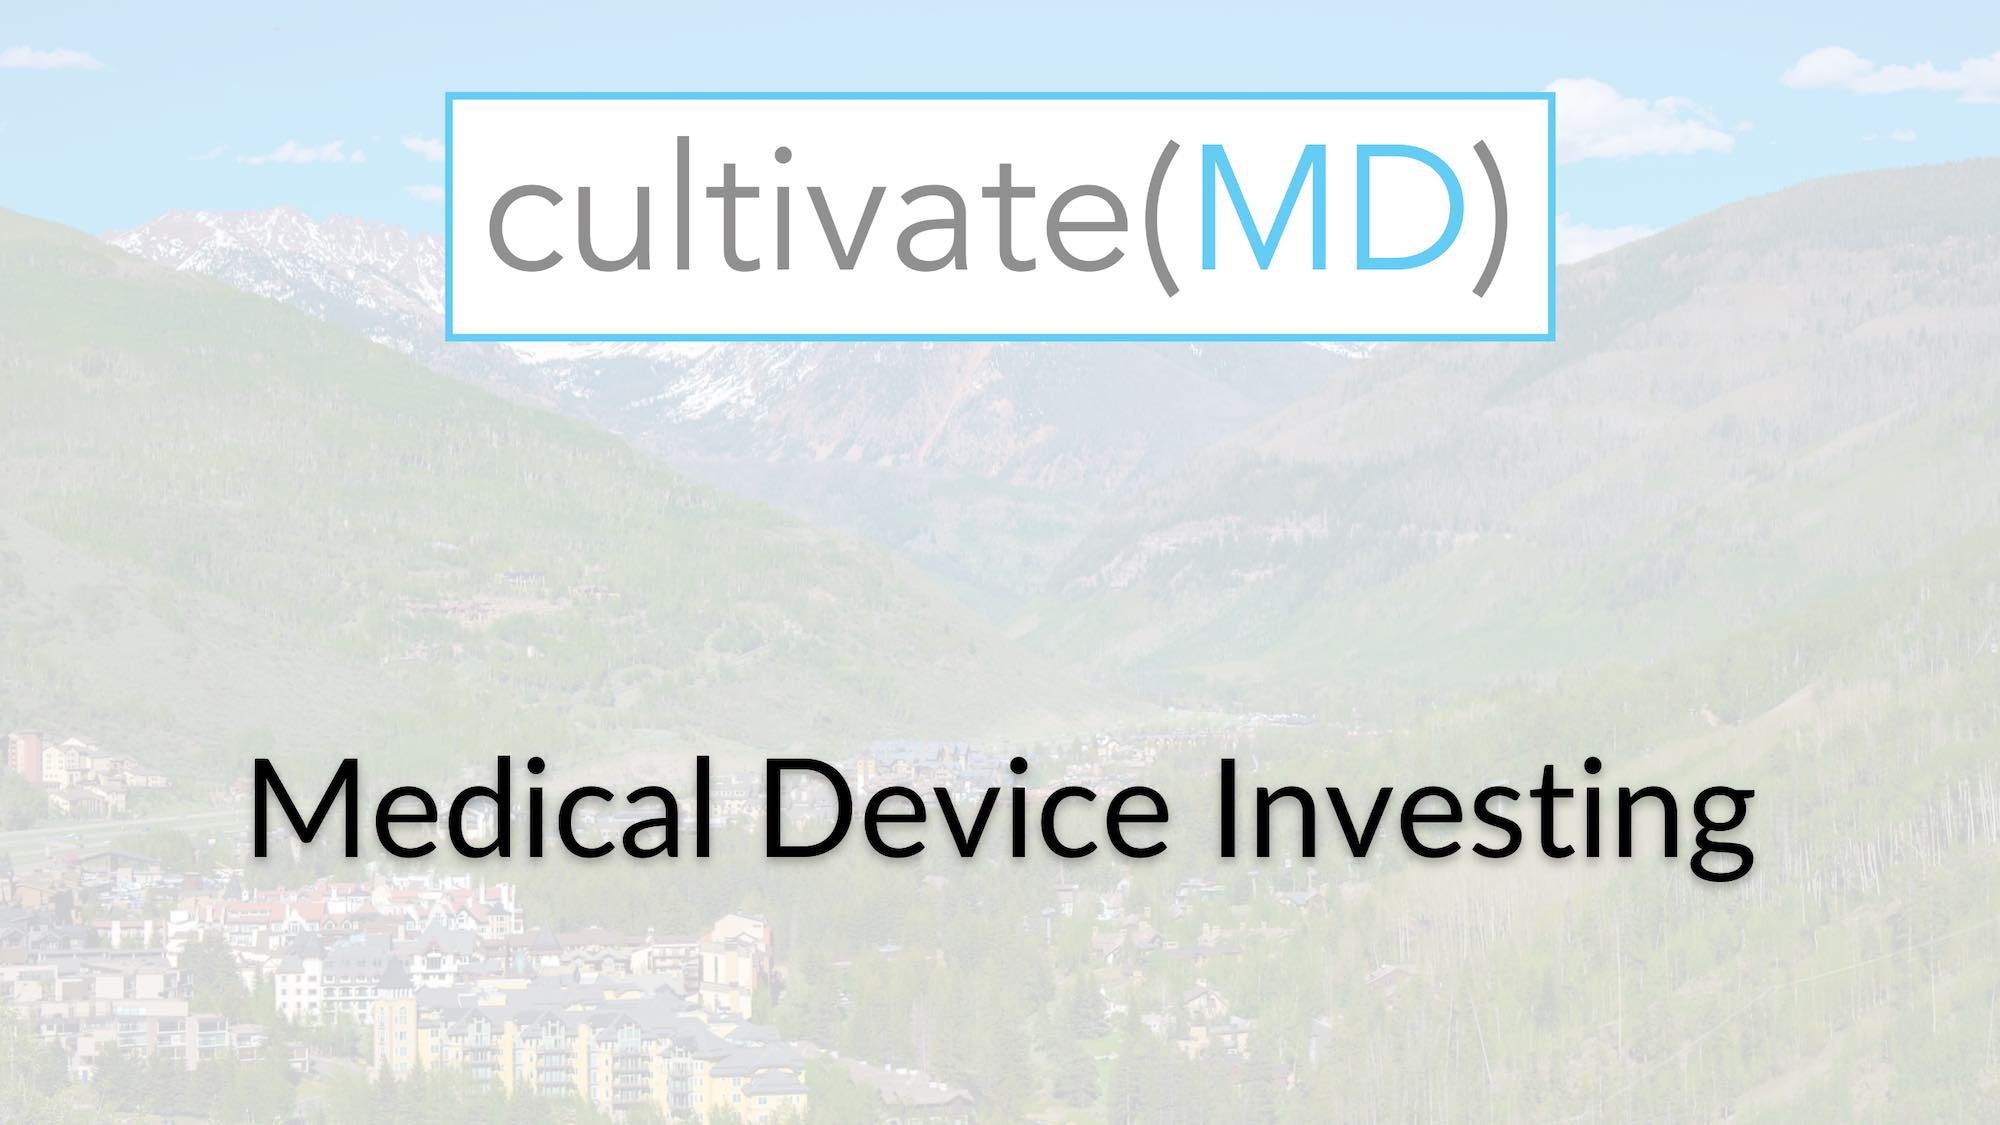 cultivate(MD) medical device investing GIG home